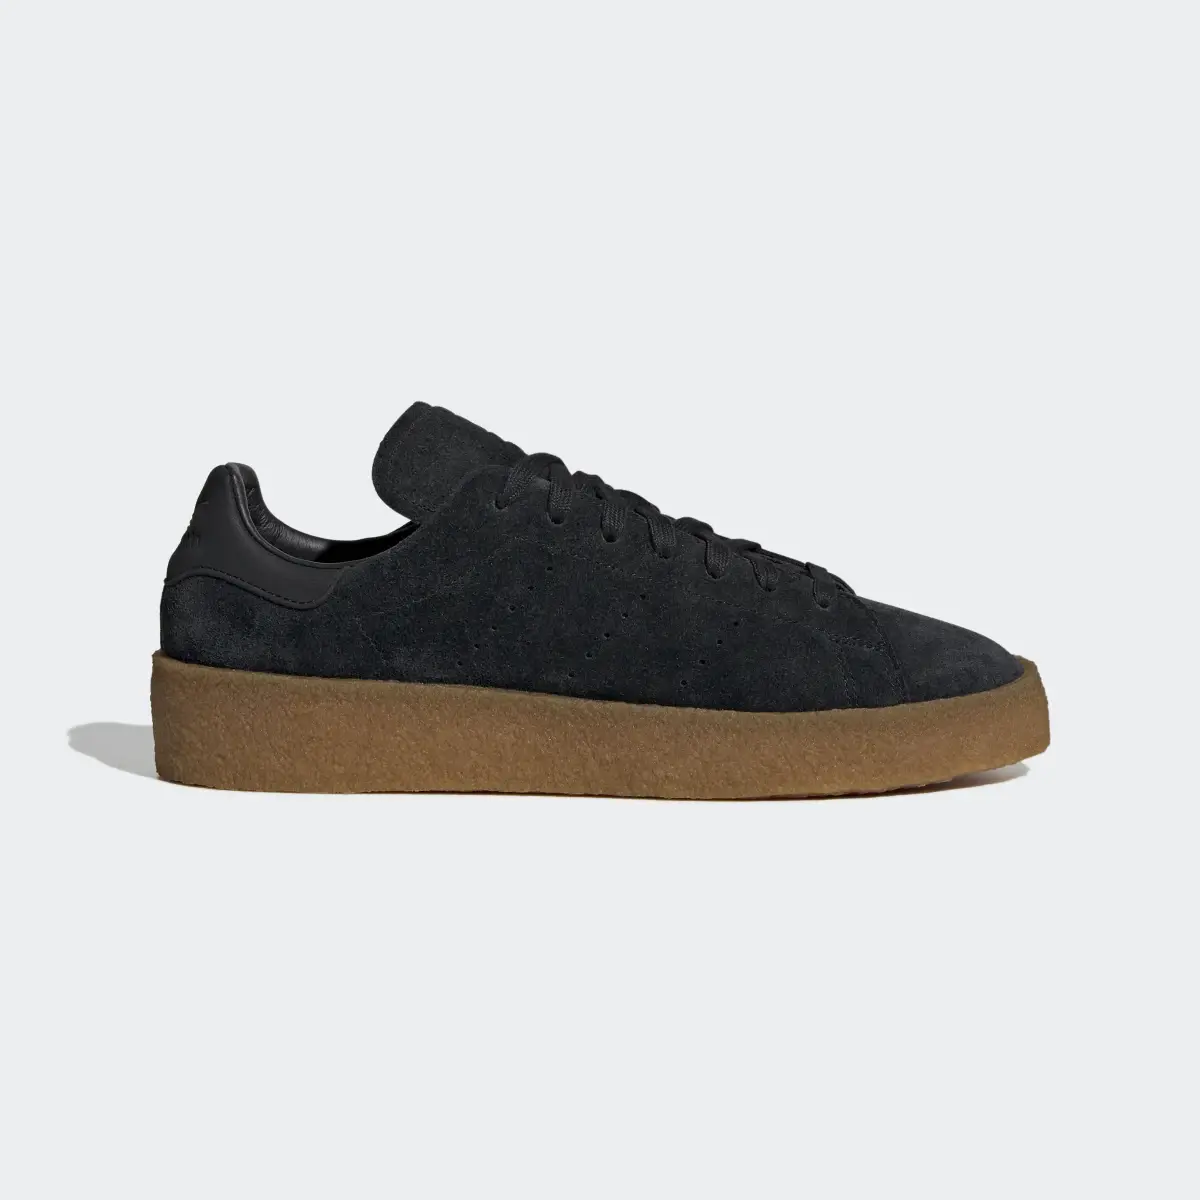 Adidas Stan Smith Crepe Shoes. 2